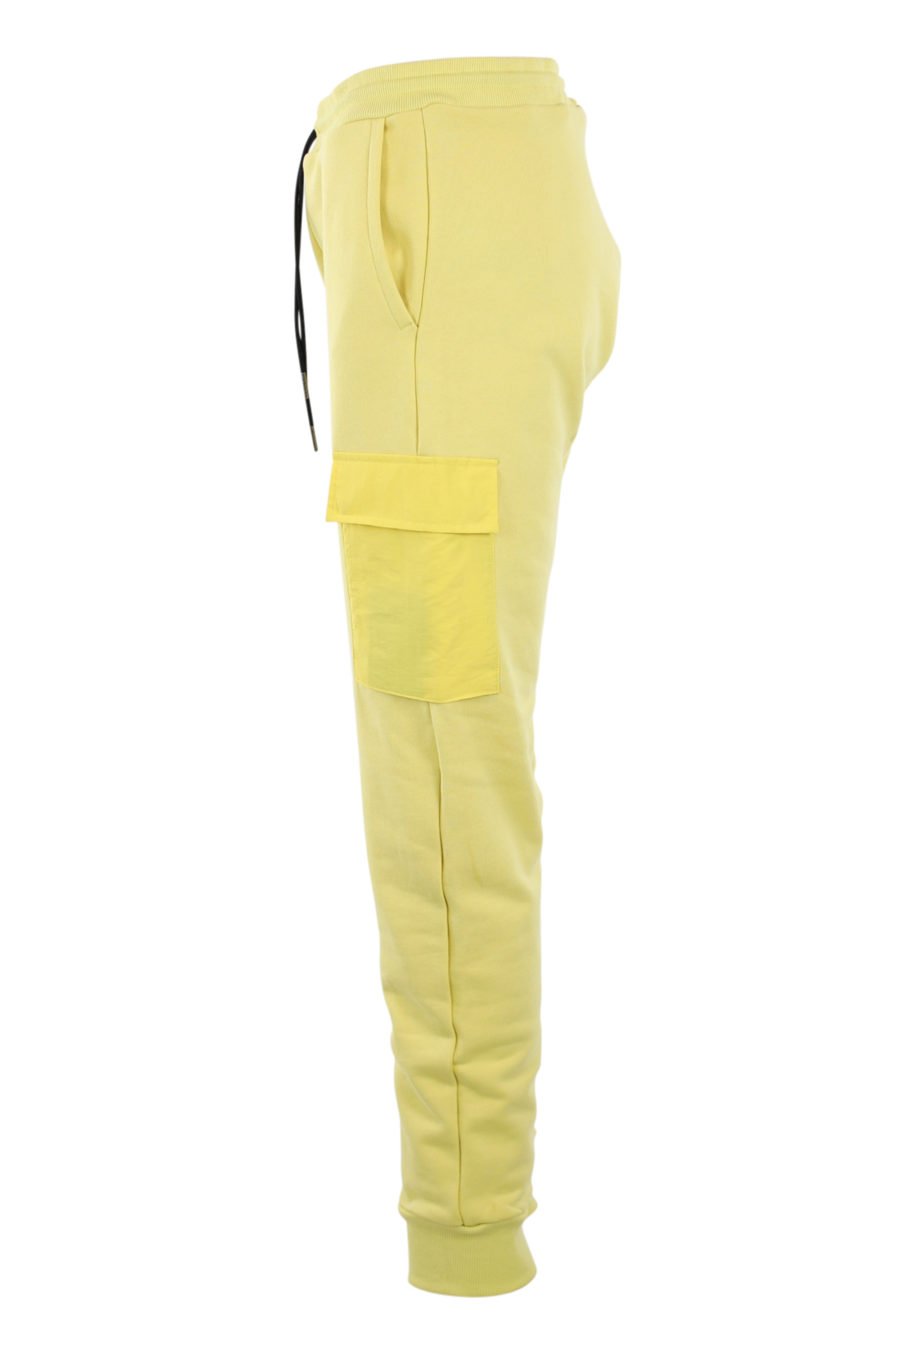 Yellow tracksuit bottoms with pockets - IMG 0909